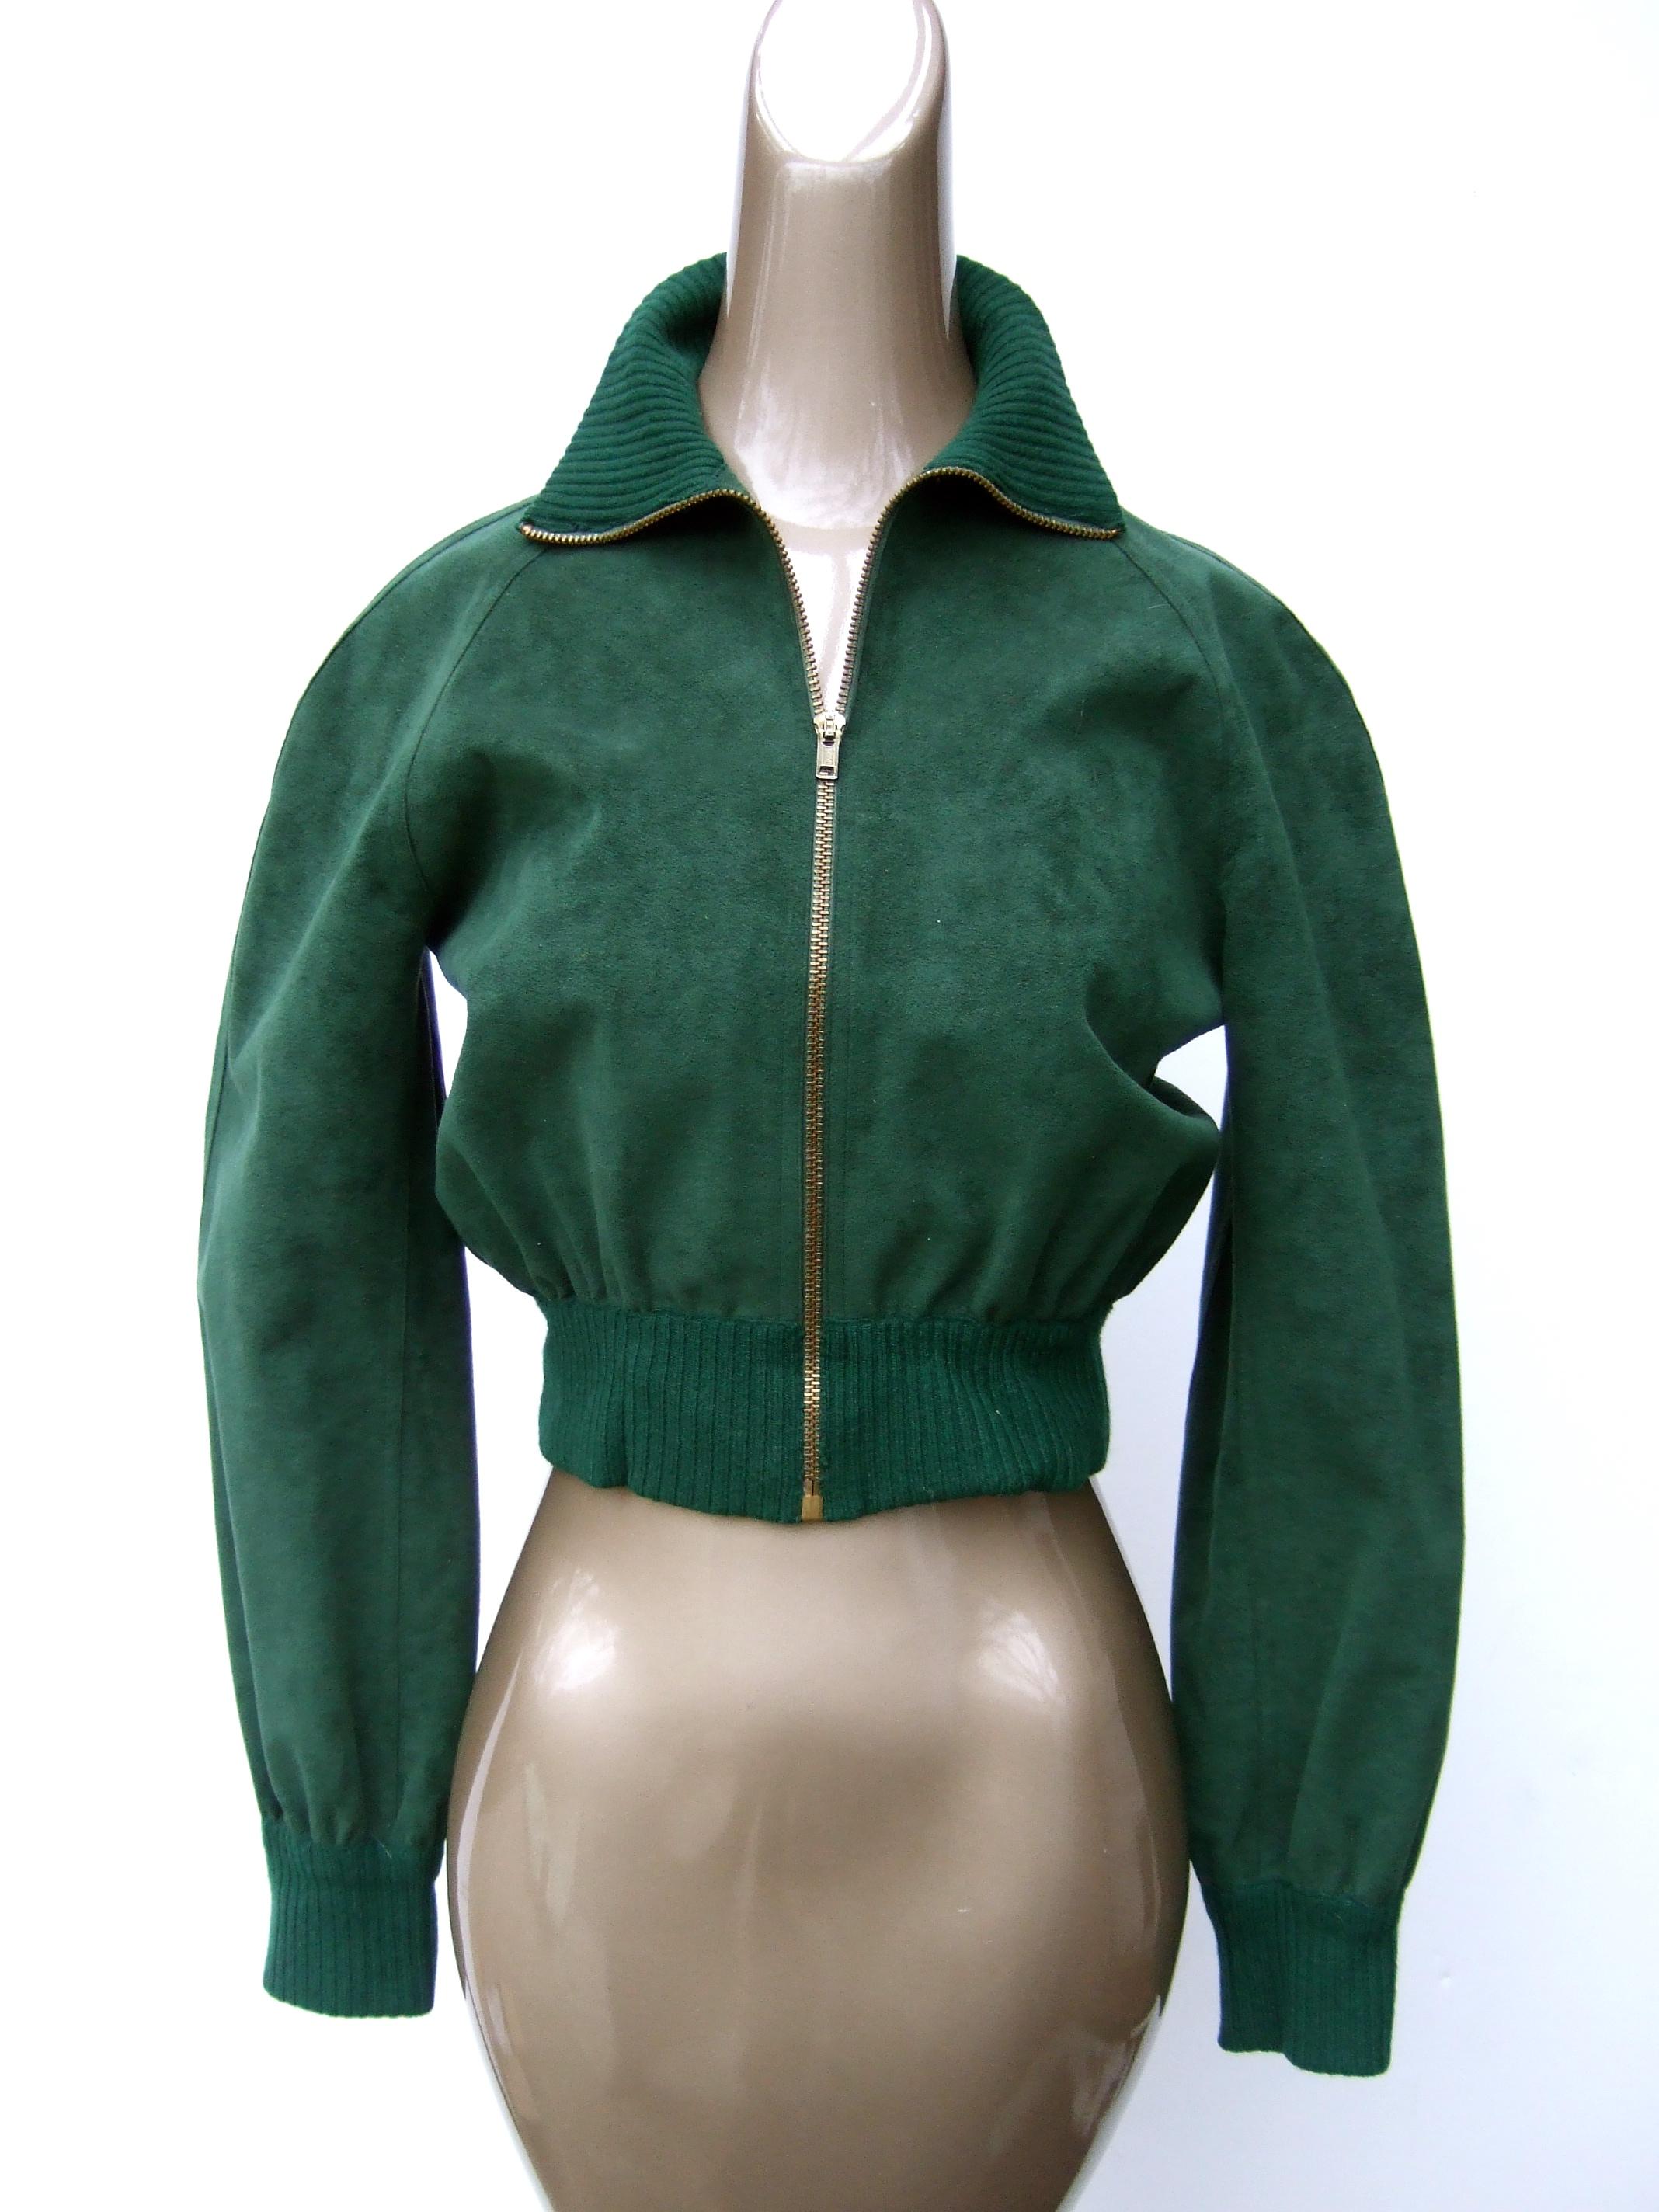 Halston Iconic ultra - feather faux suede bomber style zippered jacket c 1970s Petite Size
The stylish petite size cropped hunter green zippered jacket is constructed with Halston's
signature ultra - feather synthetic faux suede 

The cropped jacket